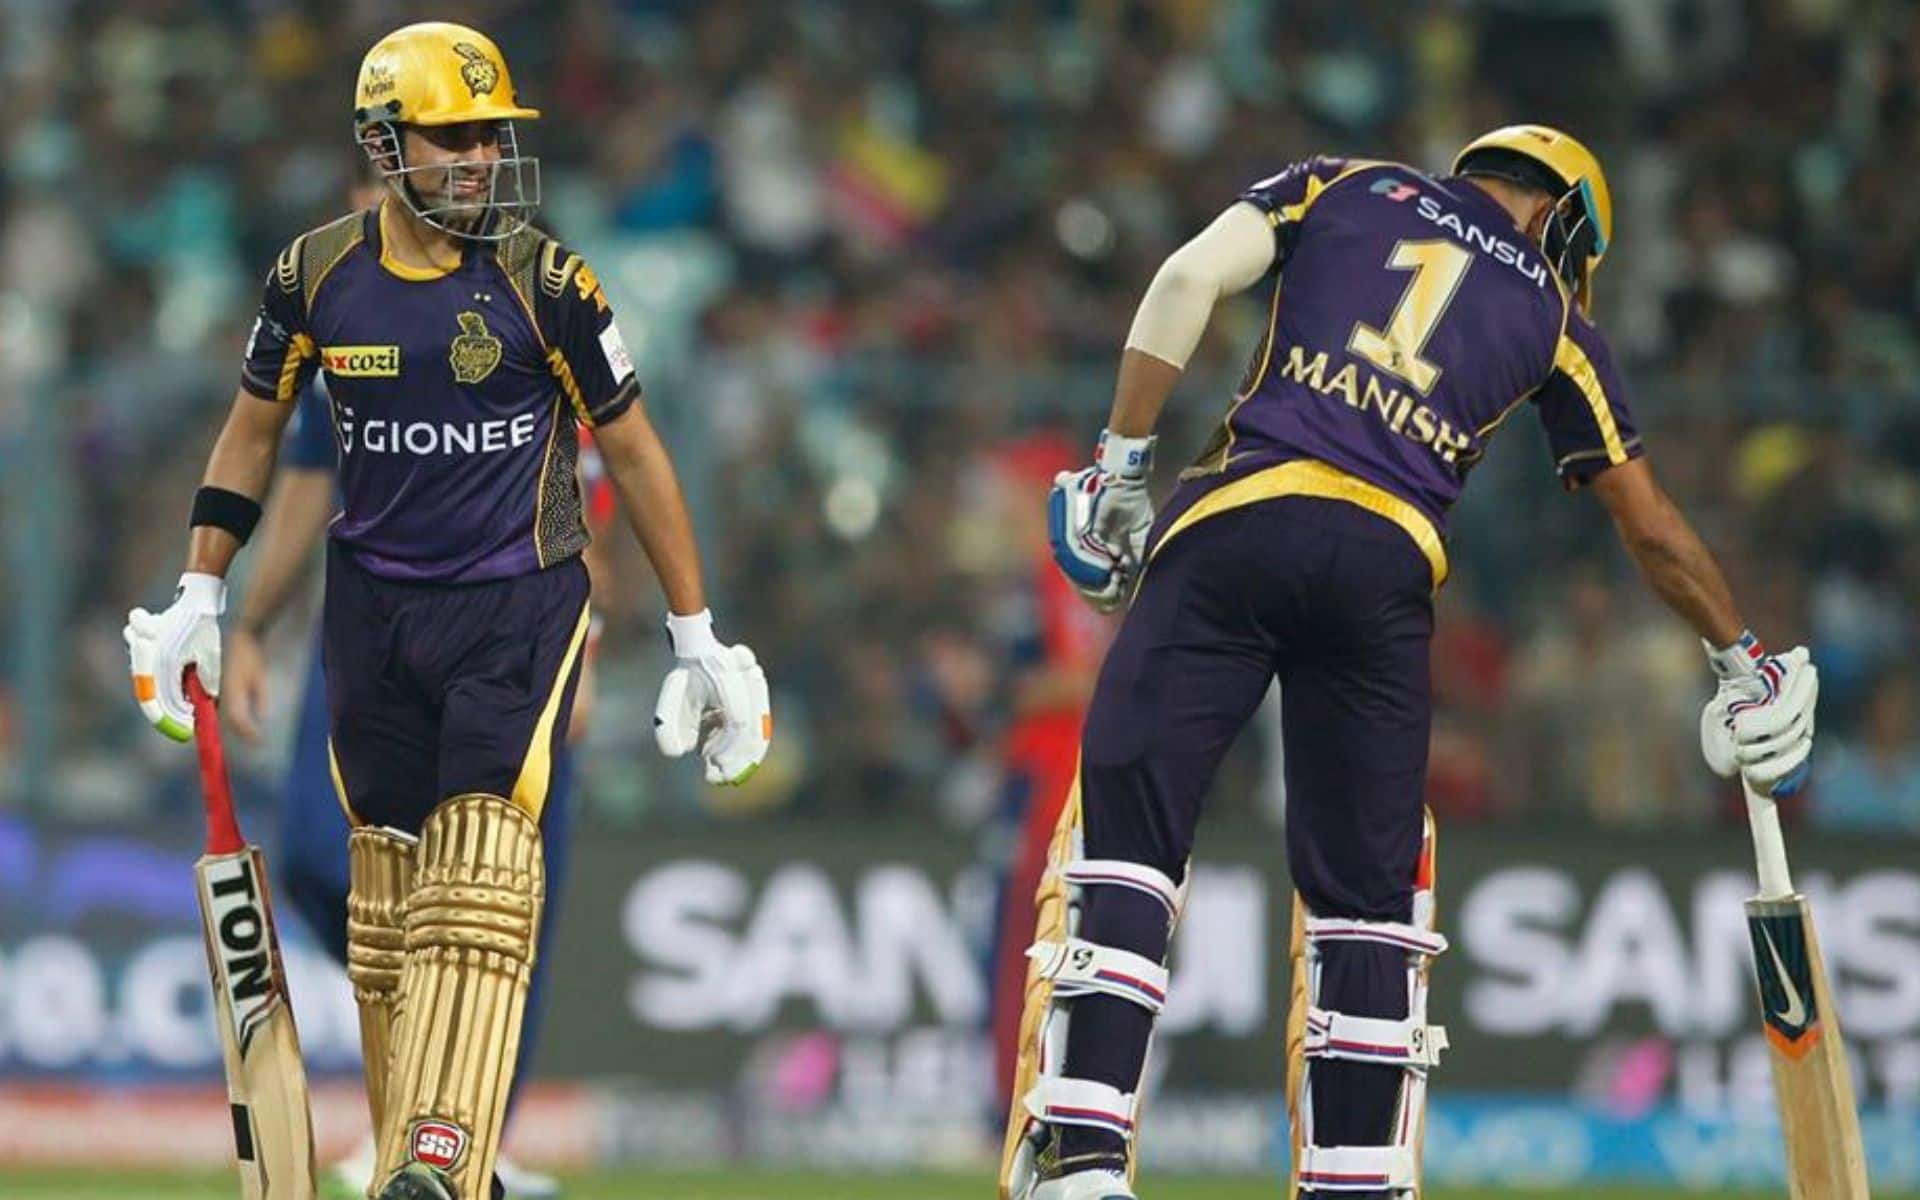 Manish Pandey last turned out for KKR back in IPL 2017 [X.com]